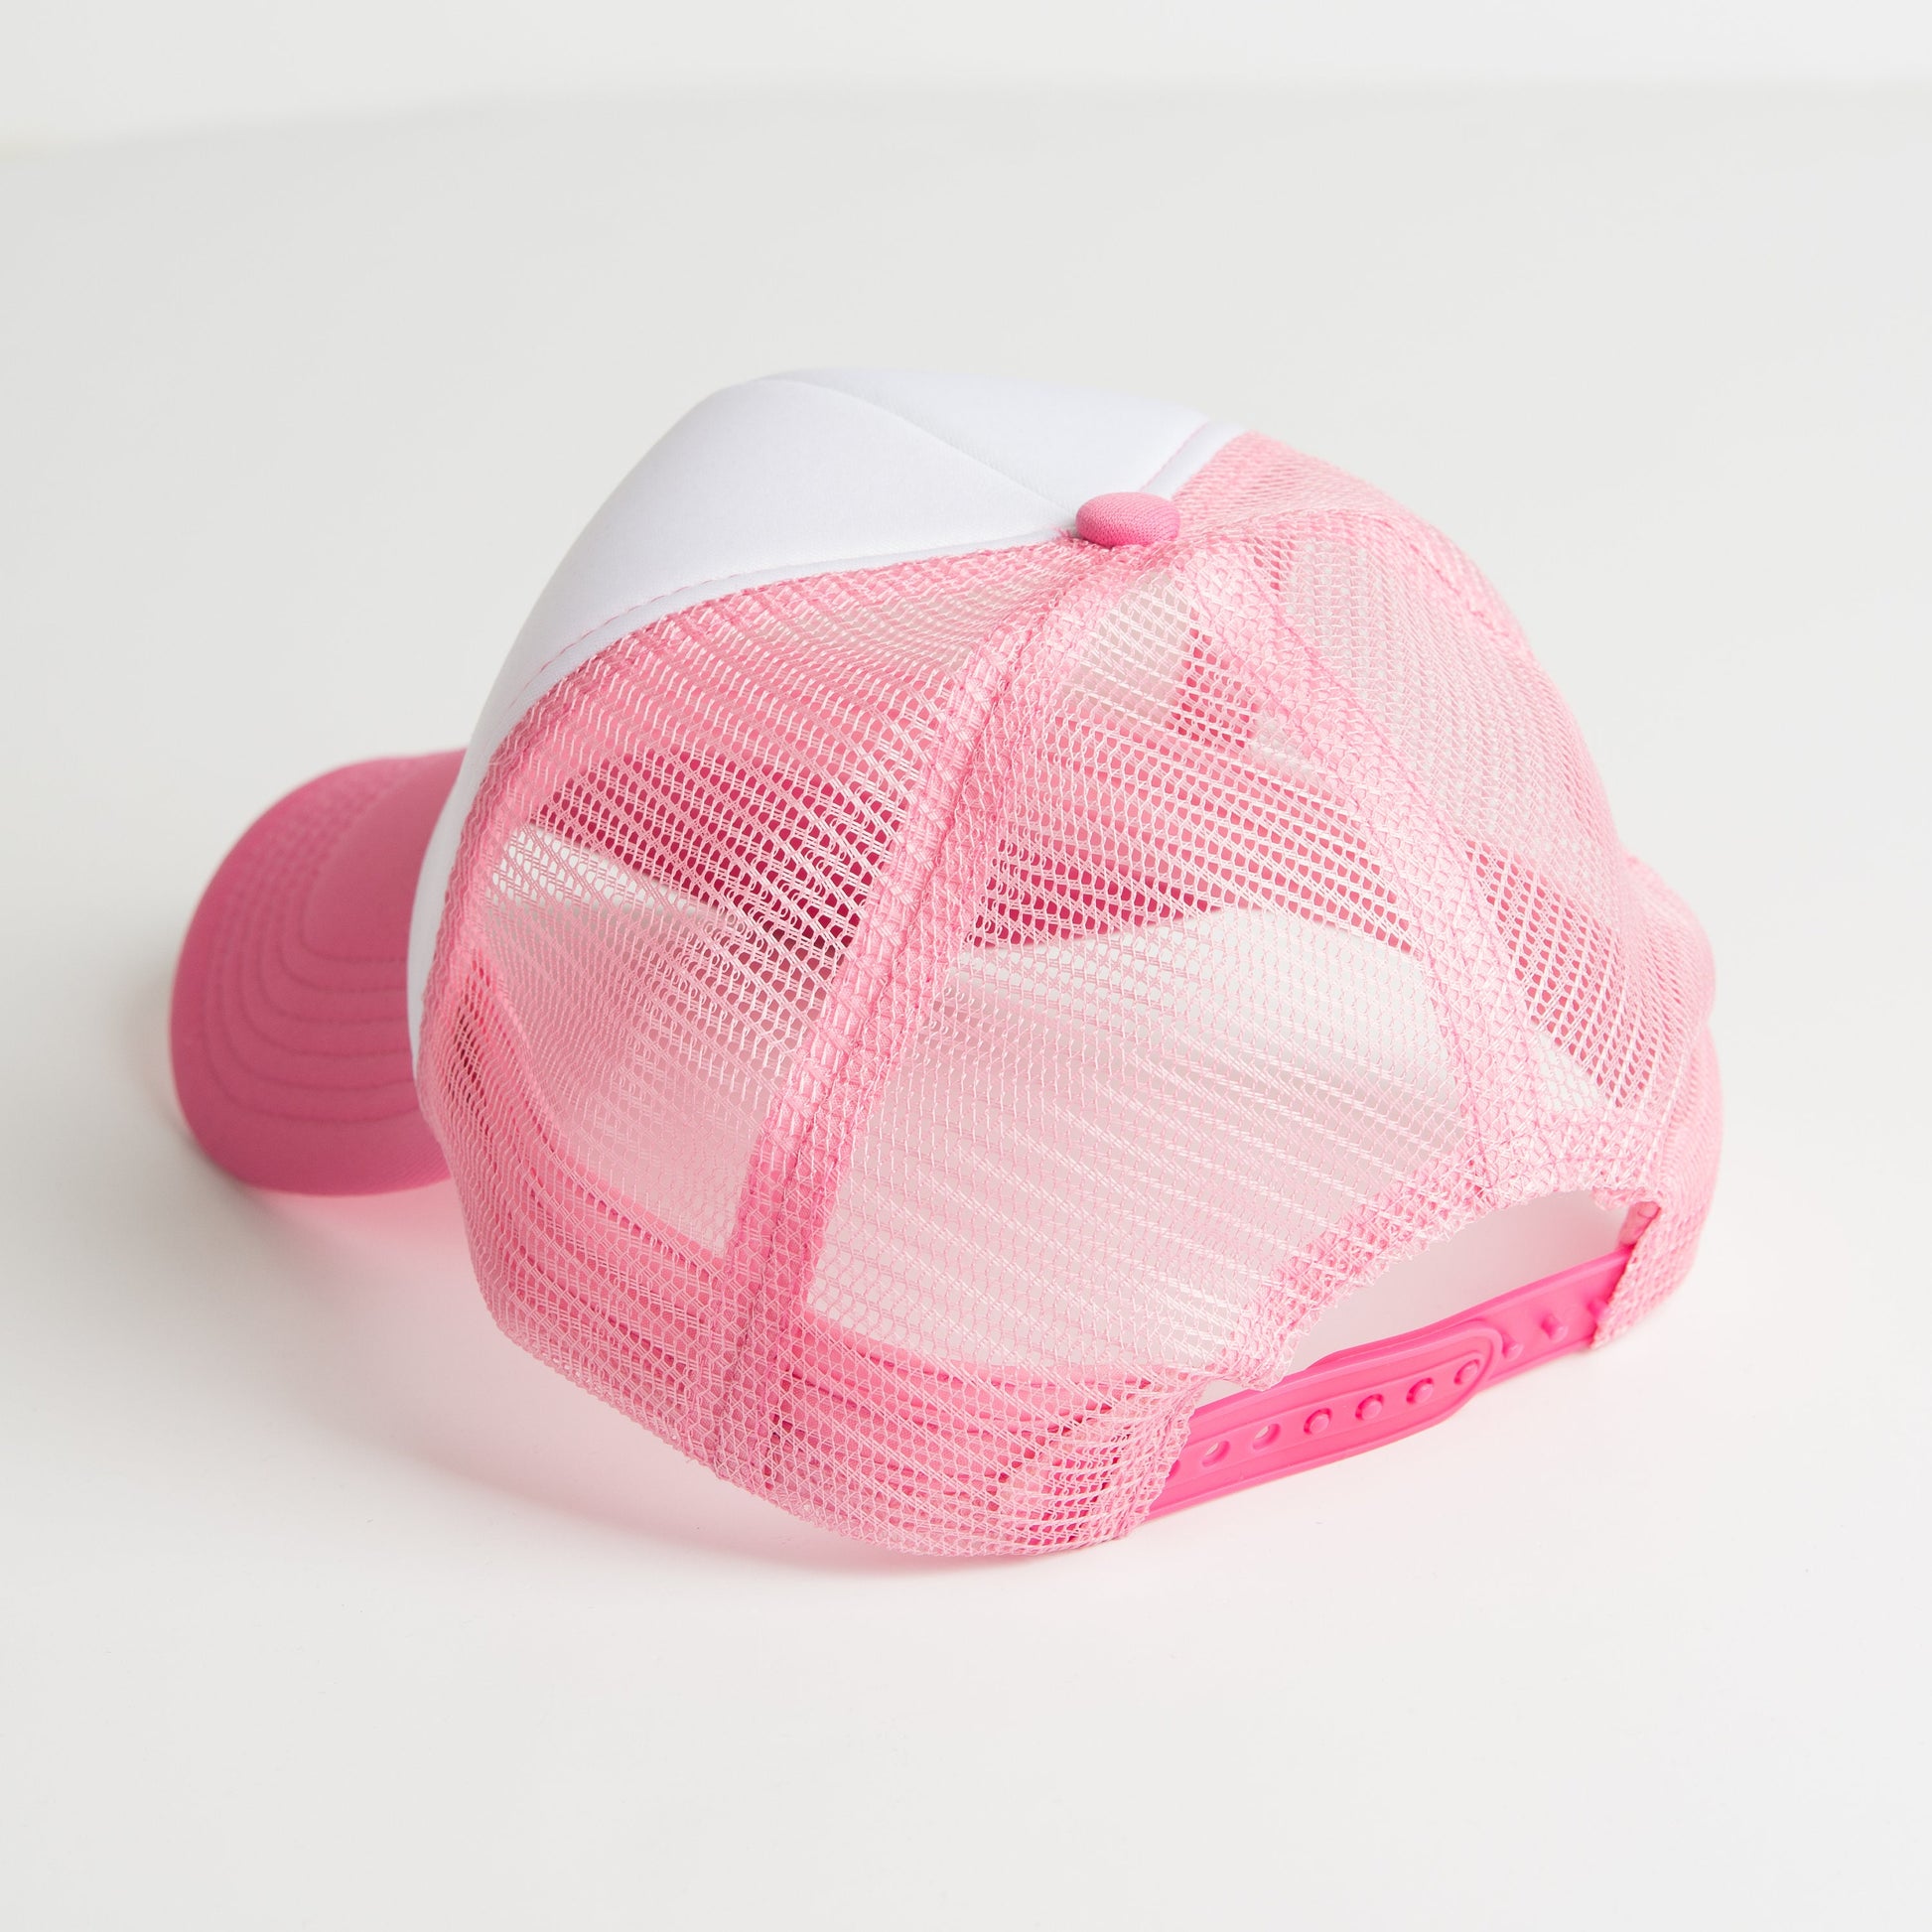 a pink and white hat on a white surface